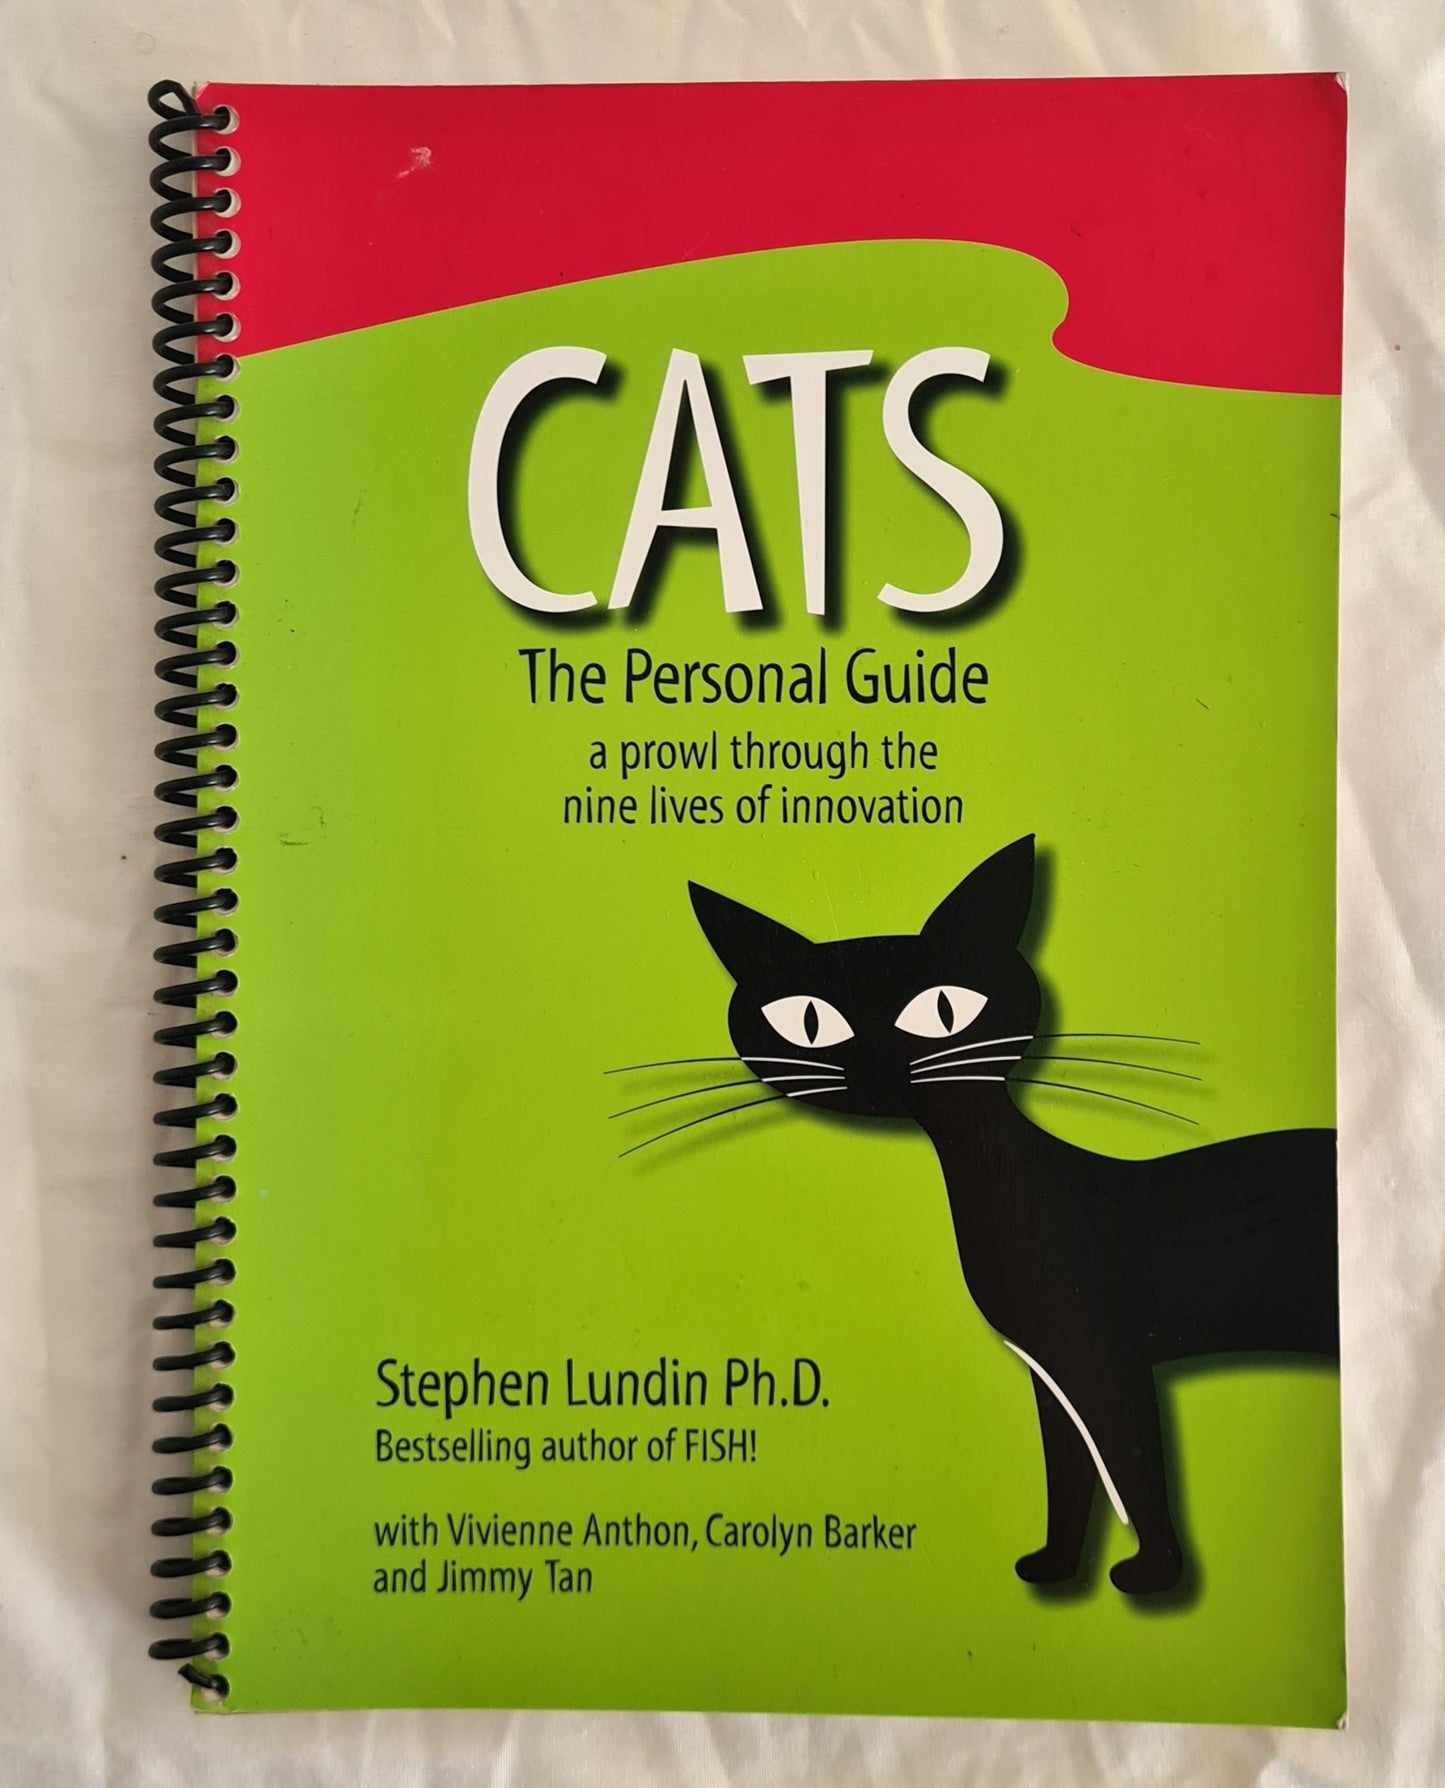 CATS: The Personal Guide  A prowl through the nine lives of innovation  by Stephen C. Ludin, Vivienne Anthon, Carolyn Barker and Jimmy Tan